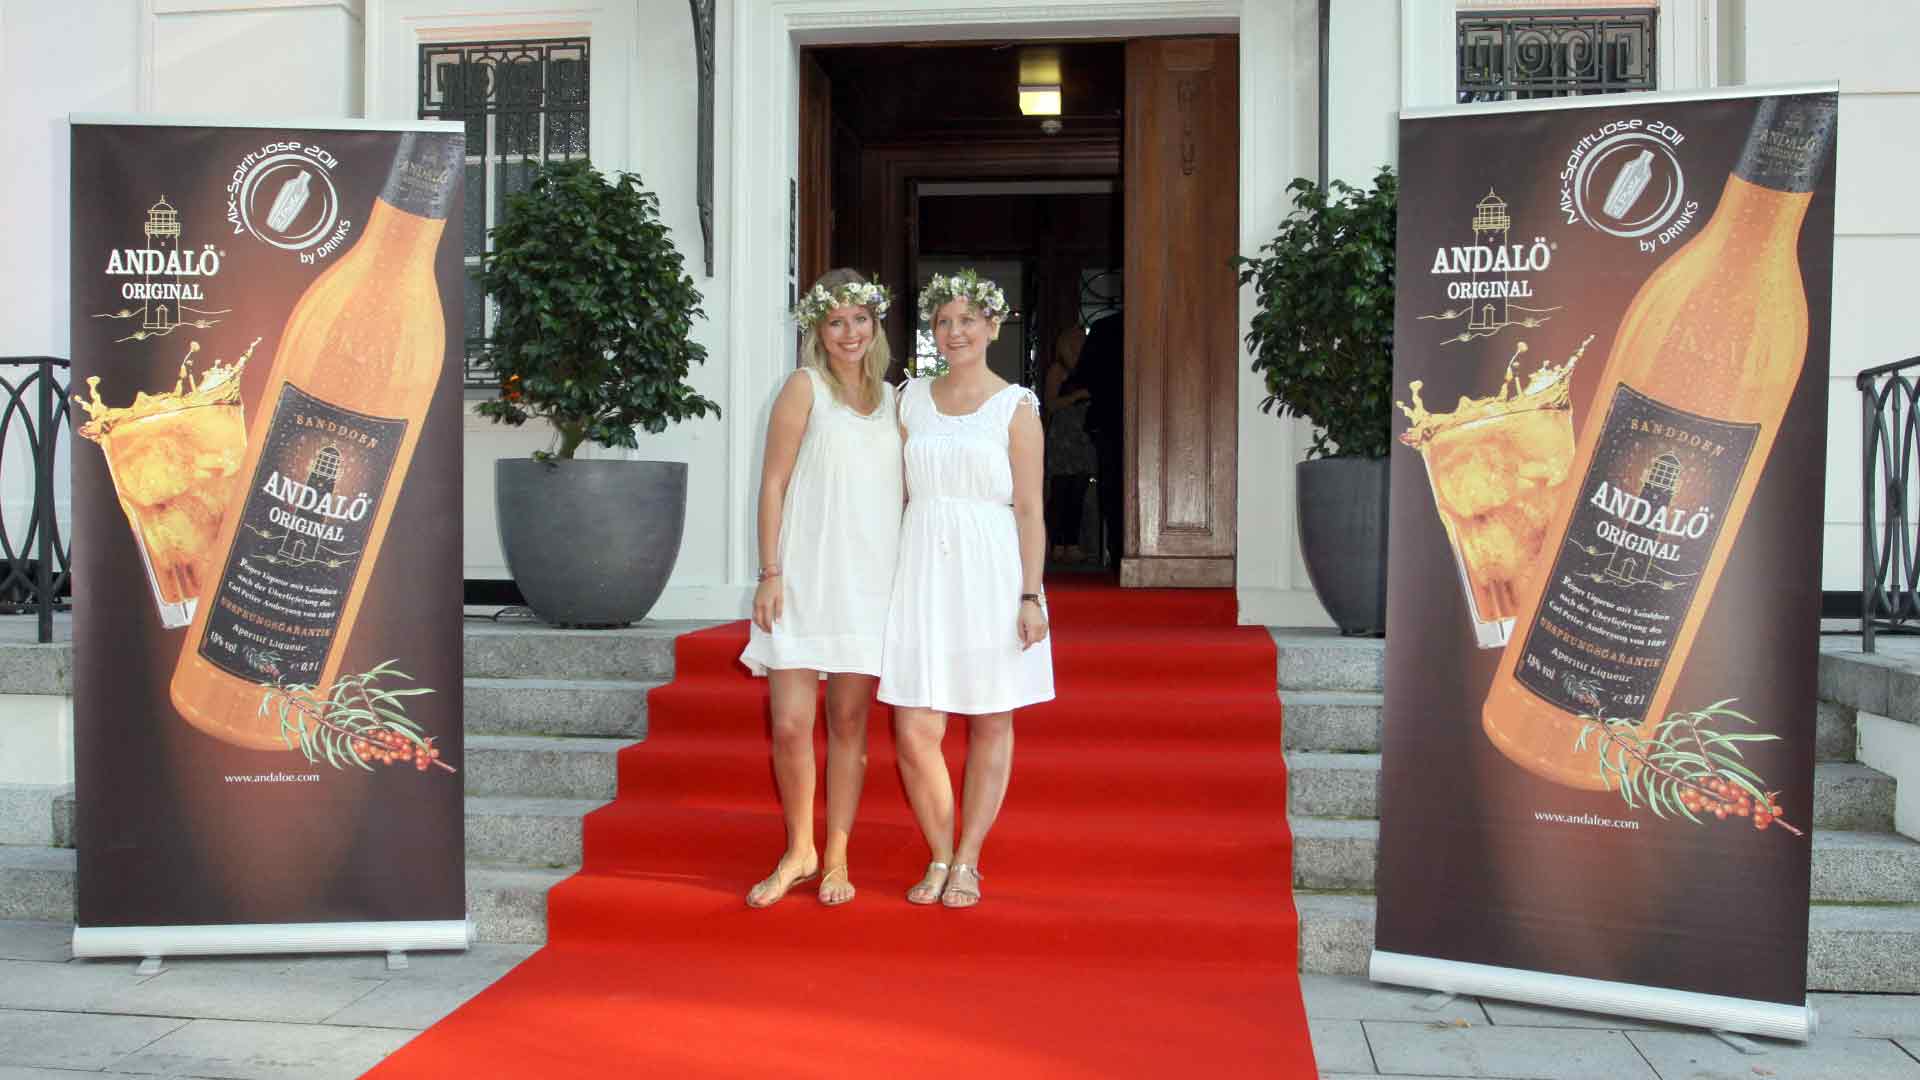 Andalö Midsummer Party in Hamburg with Pamela Anderson and many German VIP guests